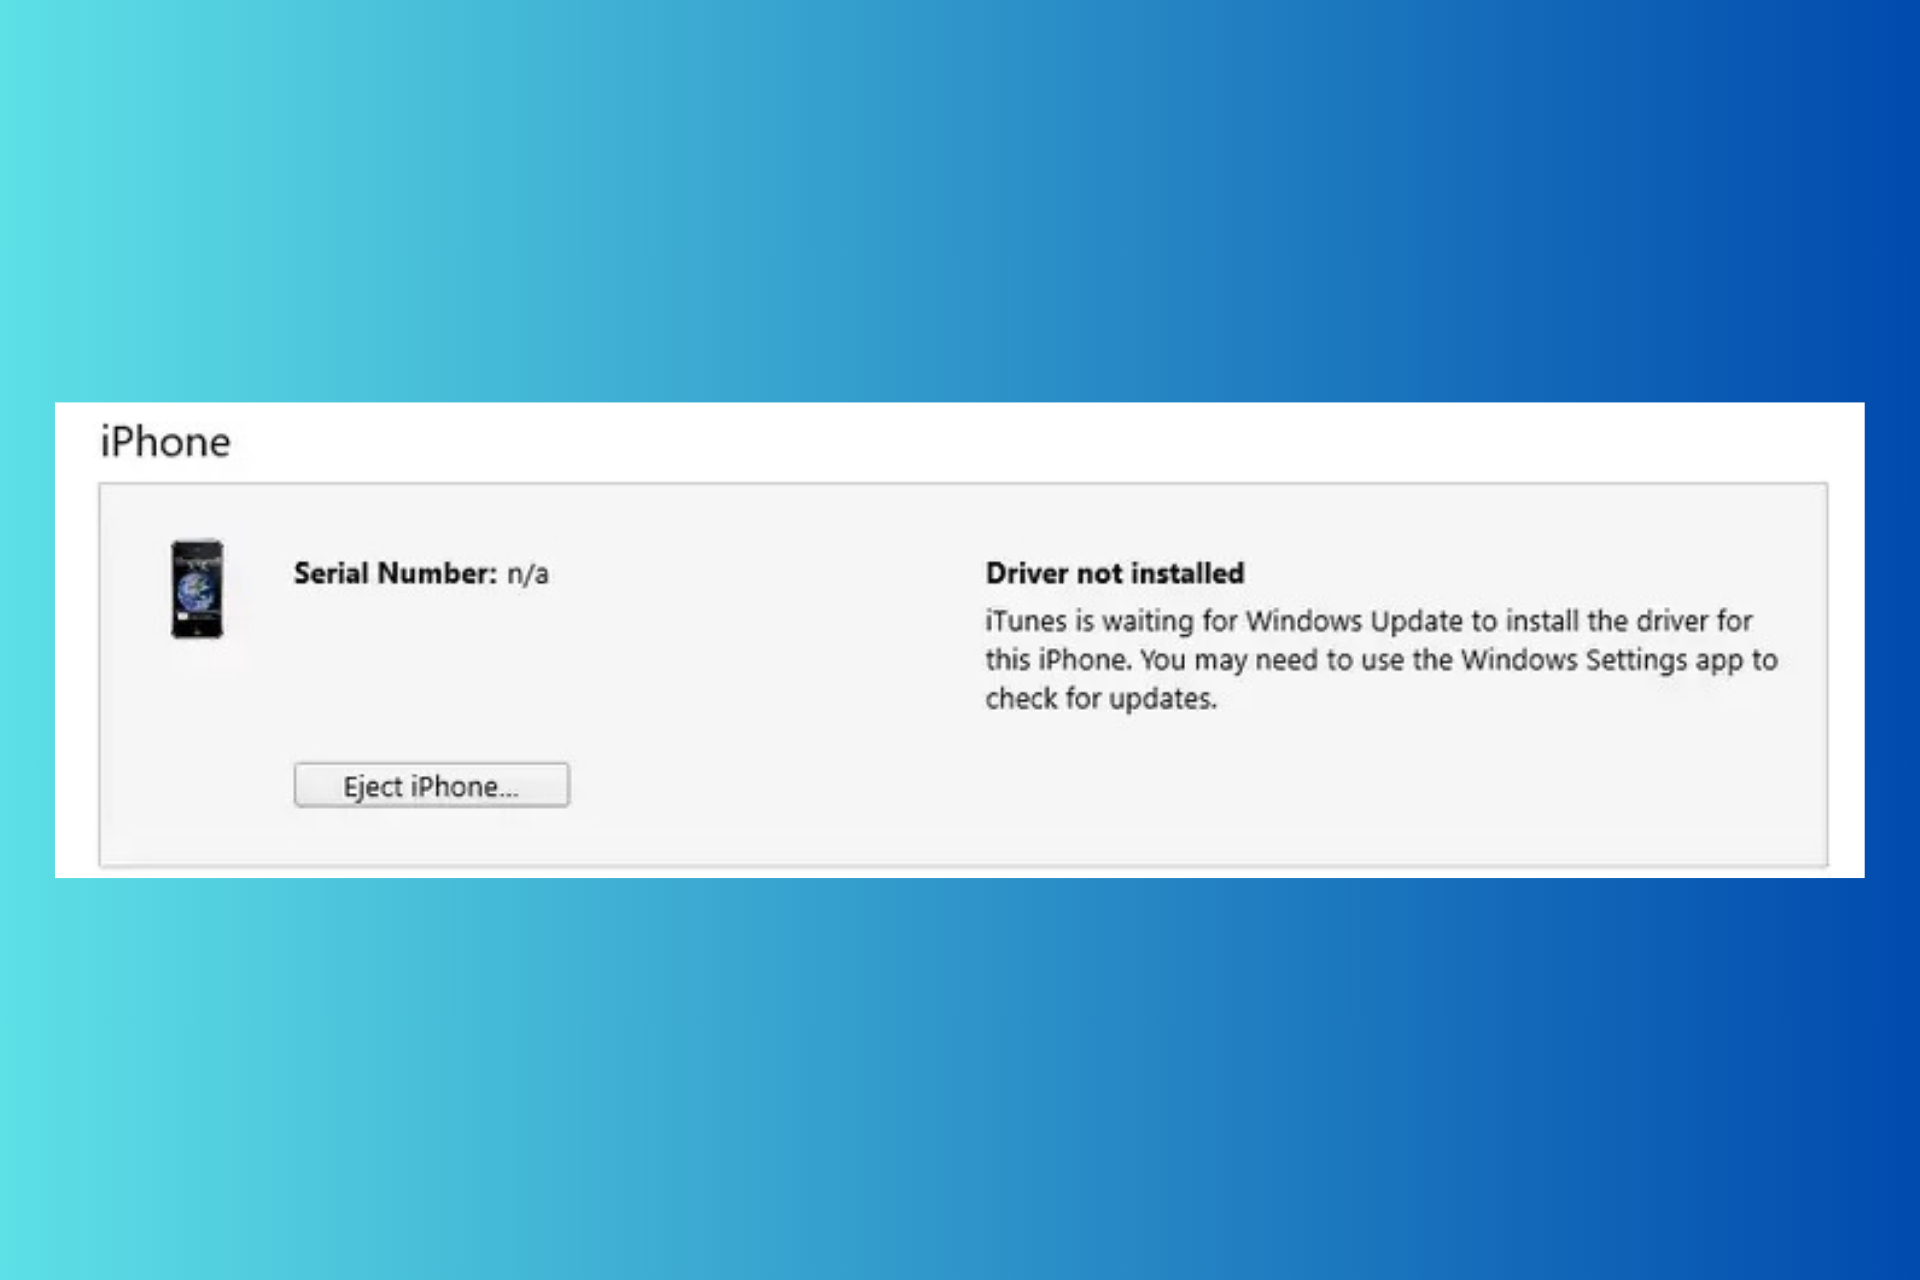 What to do if iTunes is waiting for Windows Update to install driver